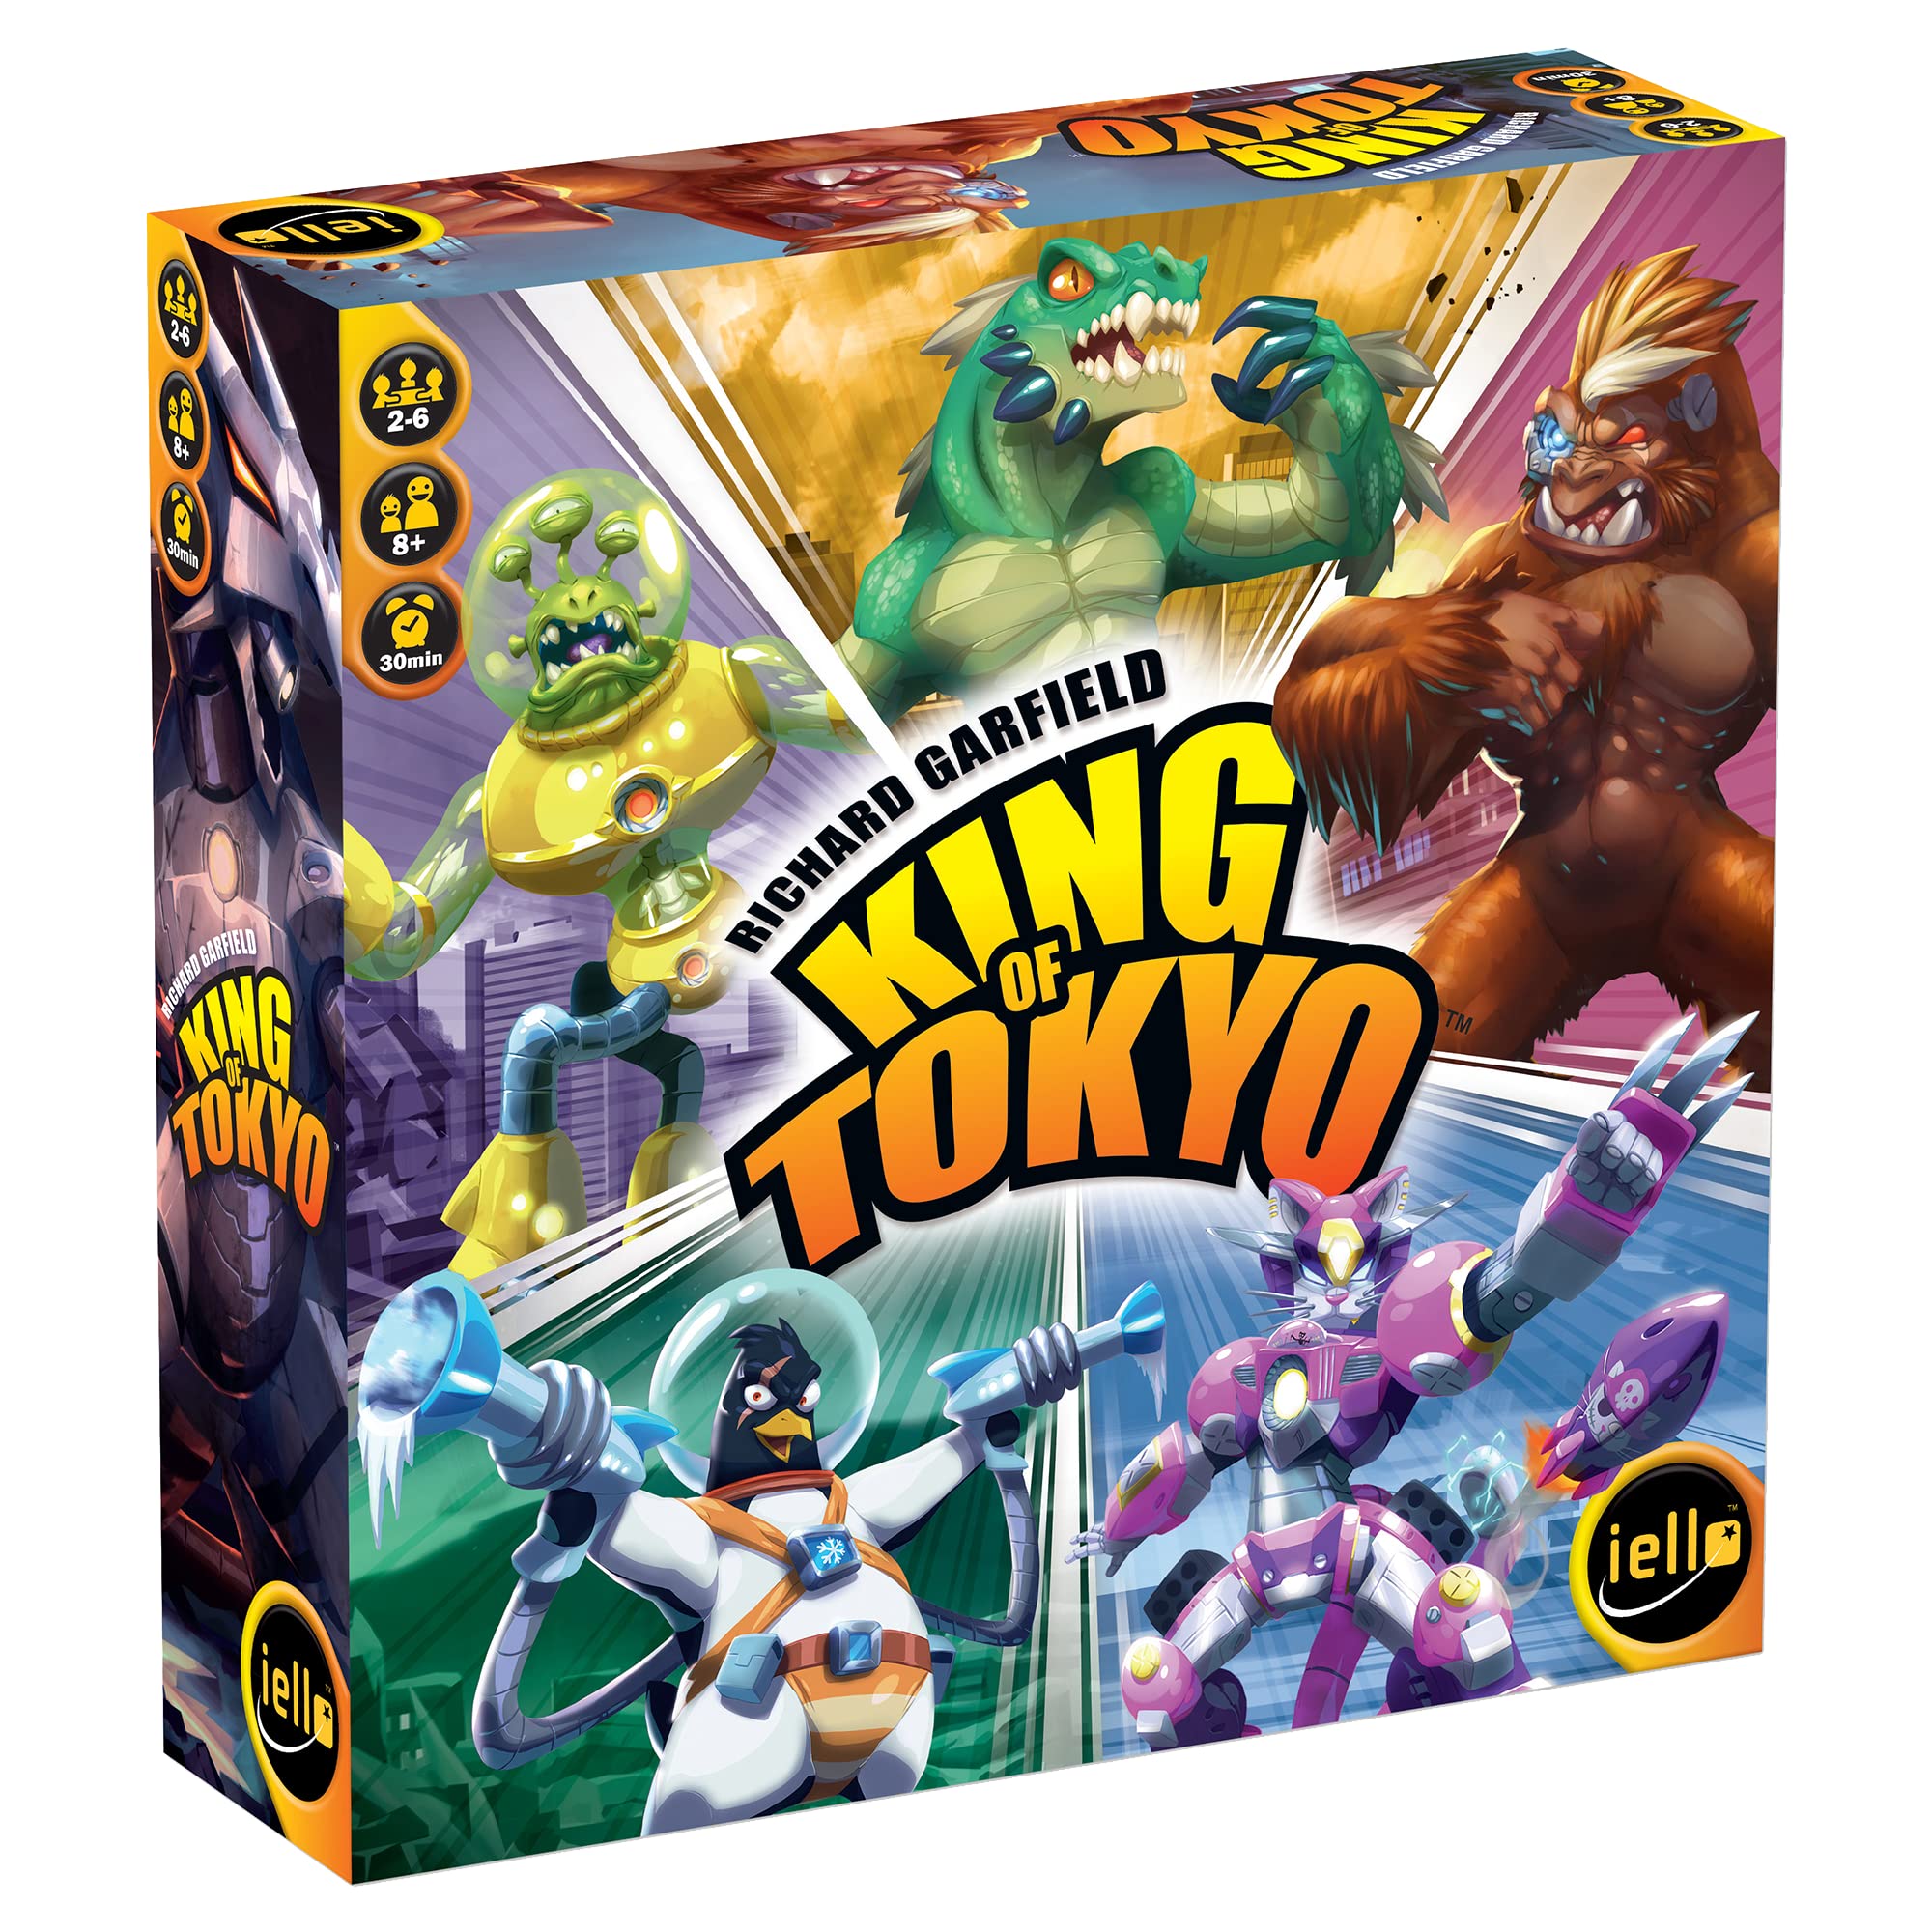 IELLO: King of Tokyo, New Edition, Strategy Board Game, Space Penguin Included in the Box, For 2 to 6 Players, 30 Minute Play Time, For Ages 8 and Up $25